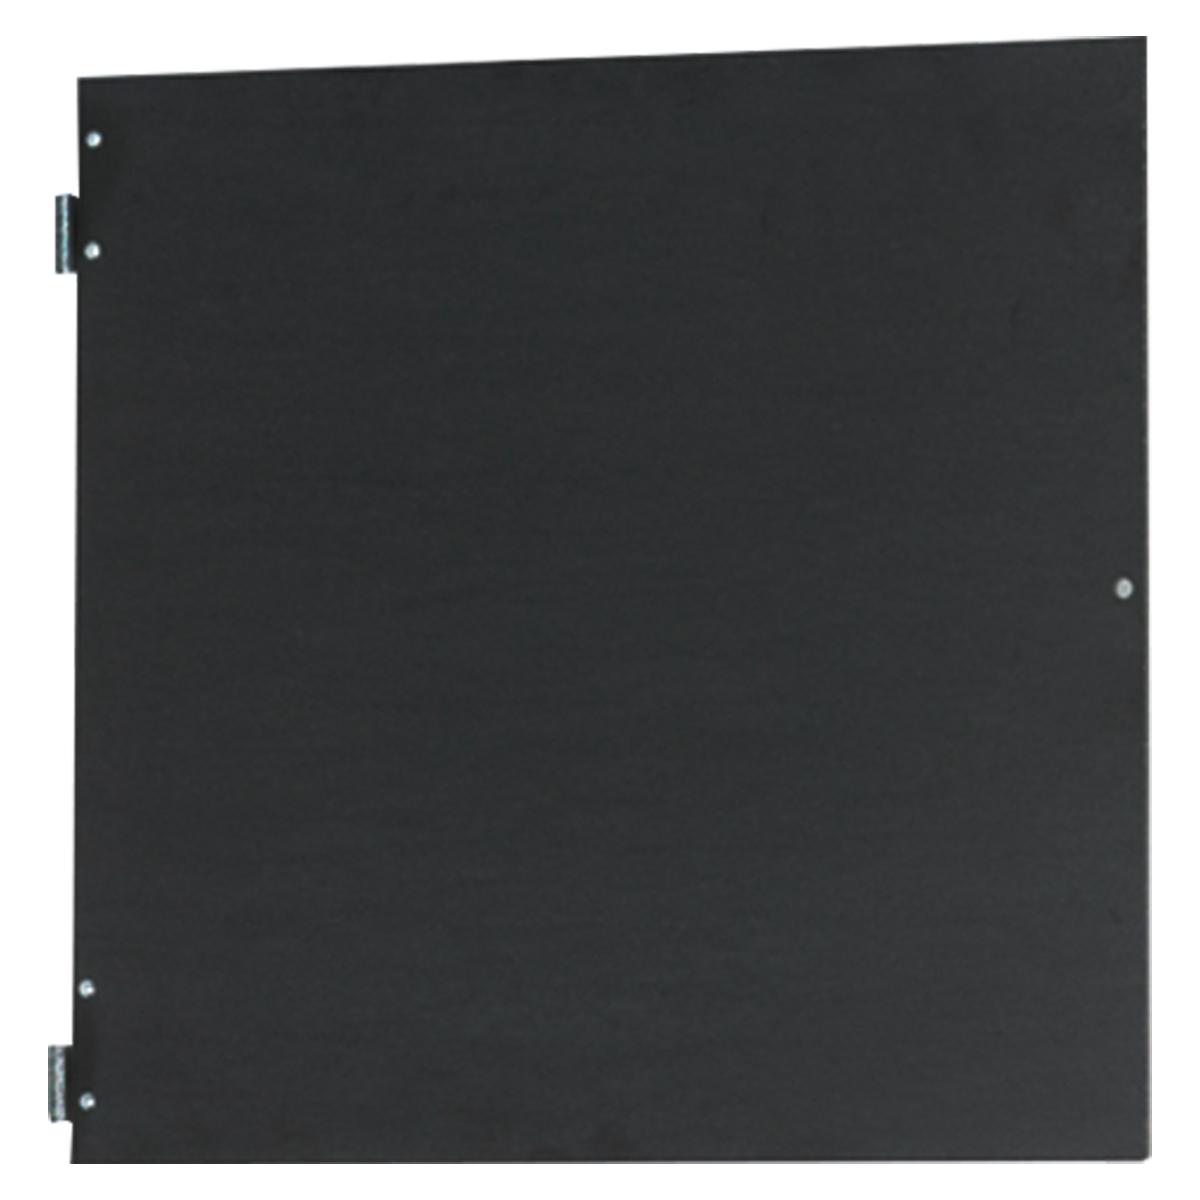 PANEL HINGED VIC 400WX590H SUIT MD042106